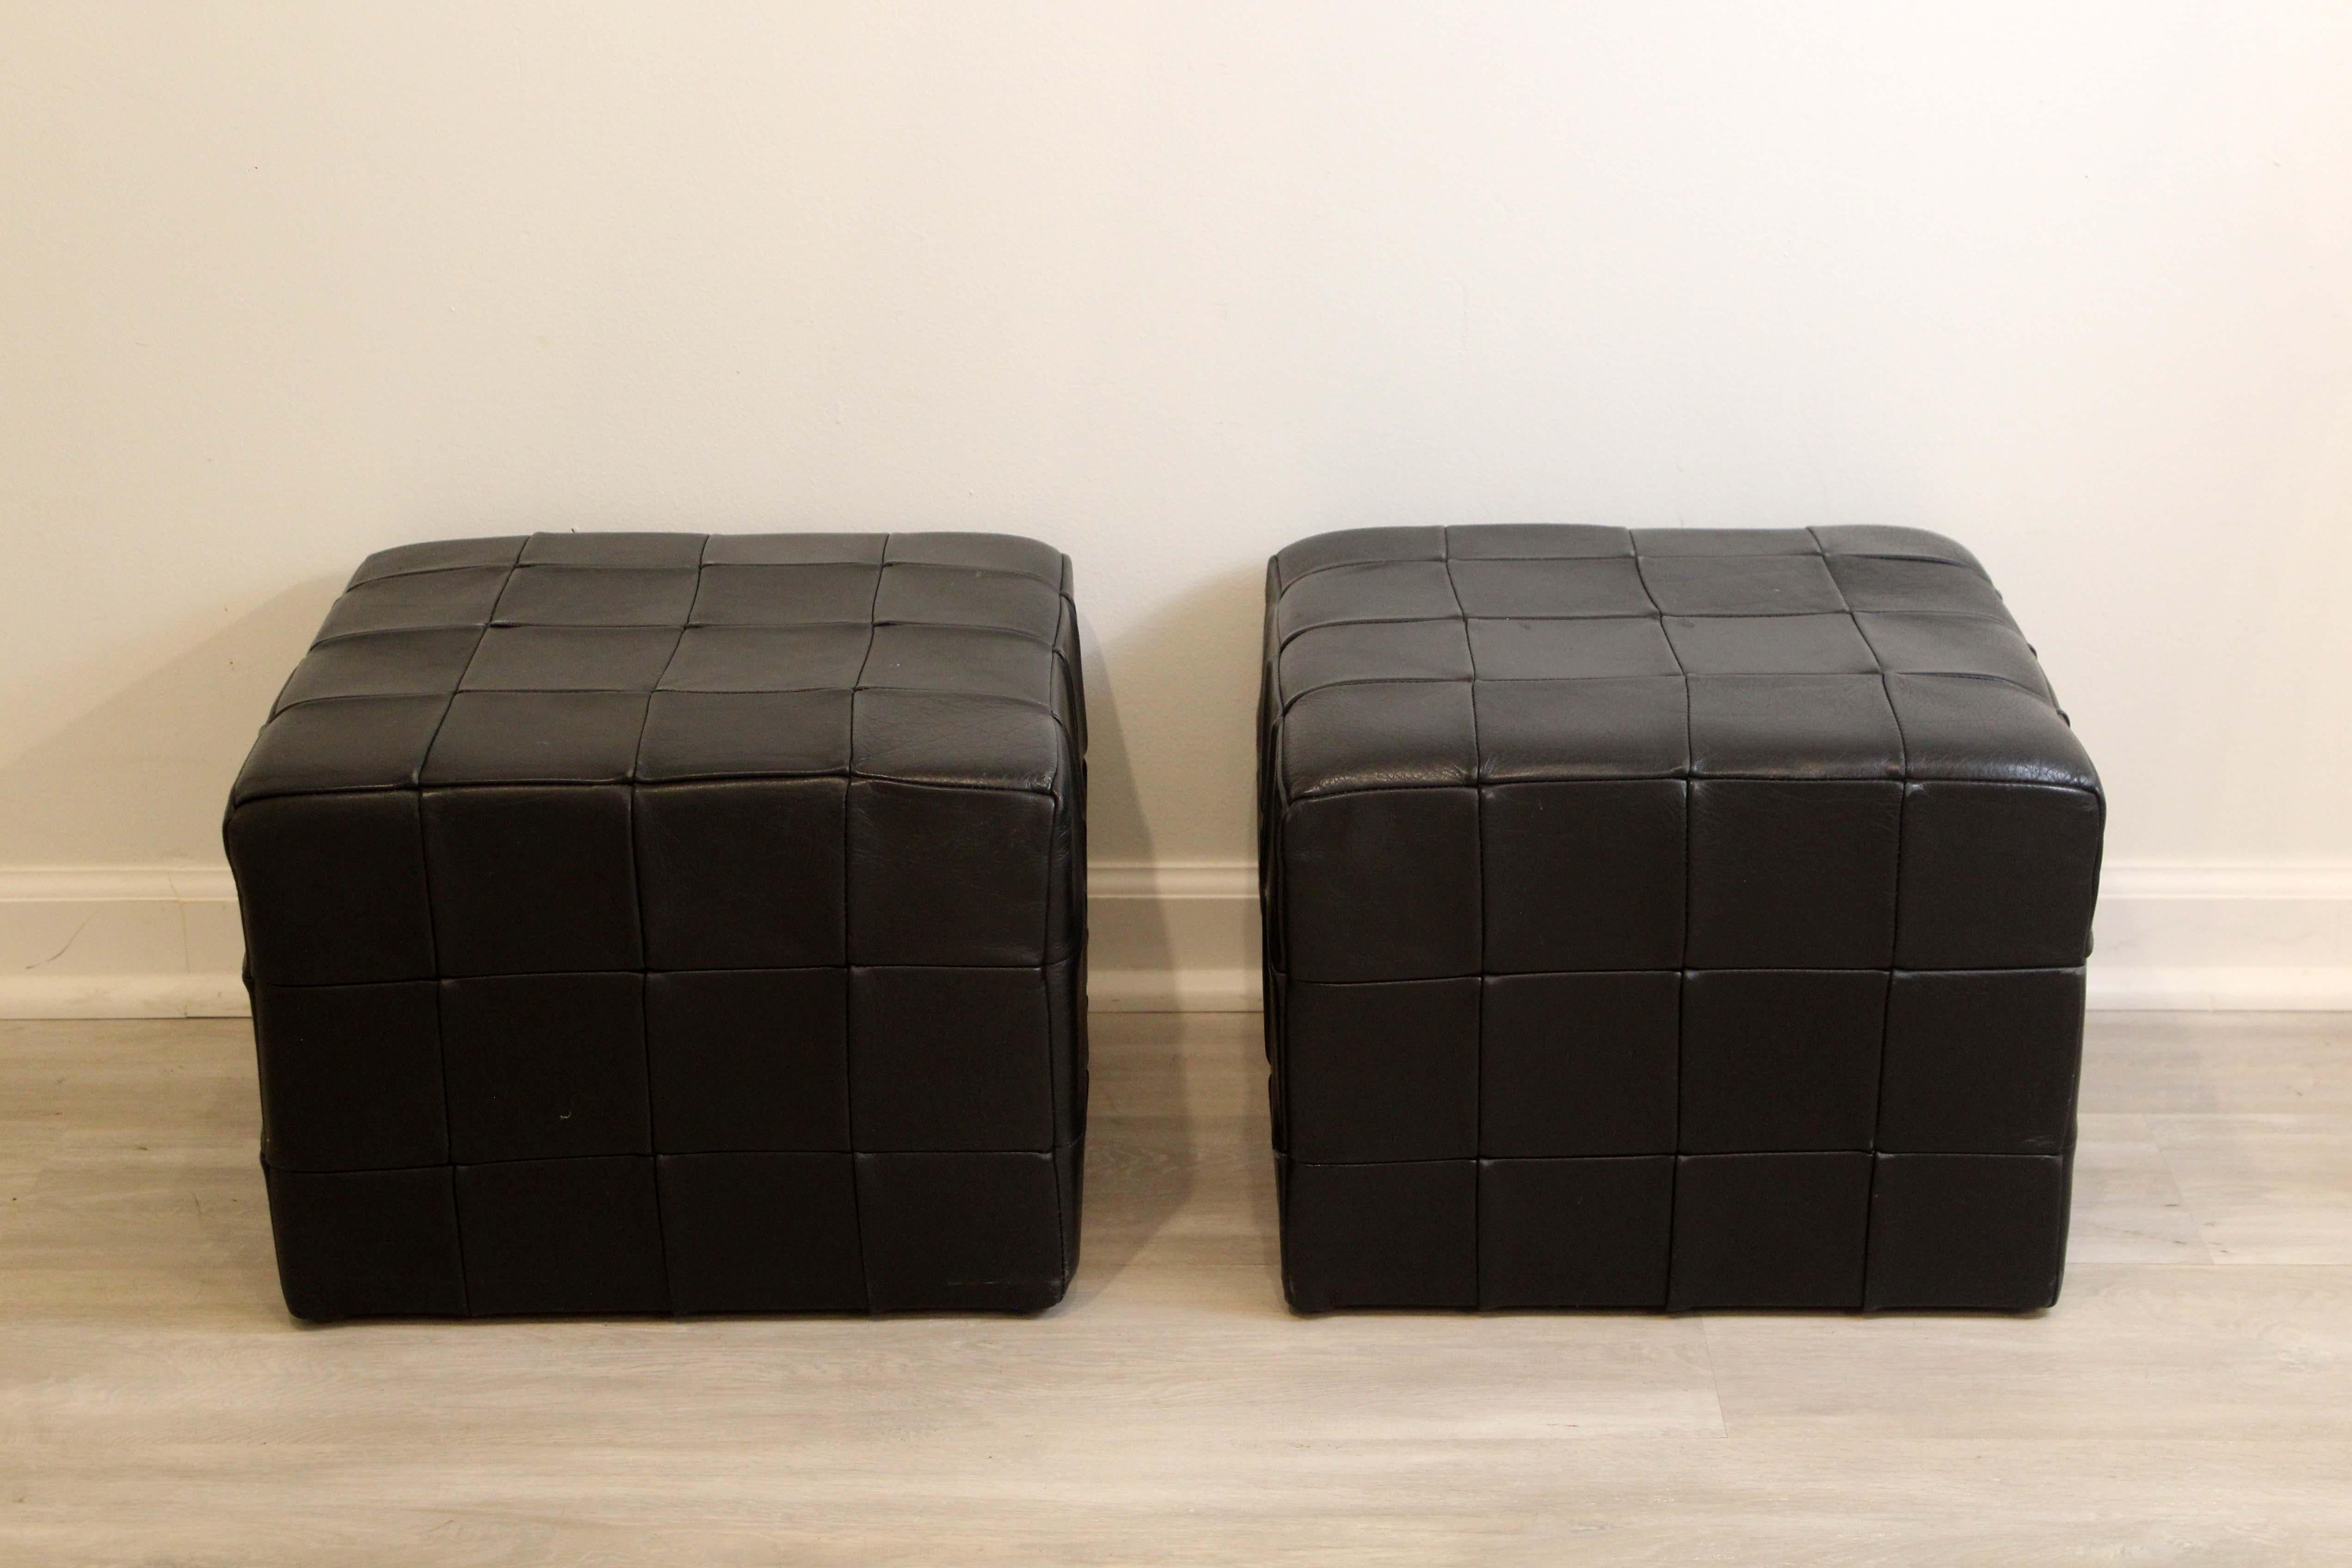 We present a pair of vinatge leather patchwork leather ottomans by Desede. In good vintage condition. Dimensions: 16.5